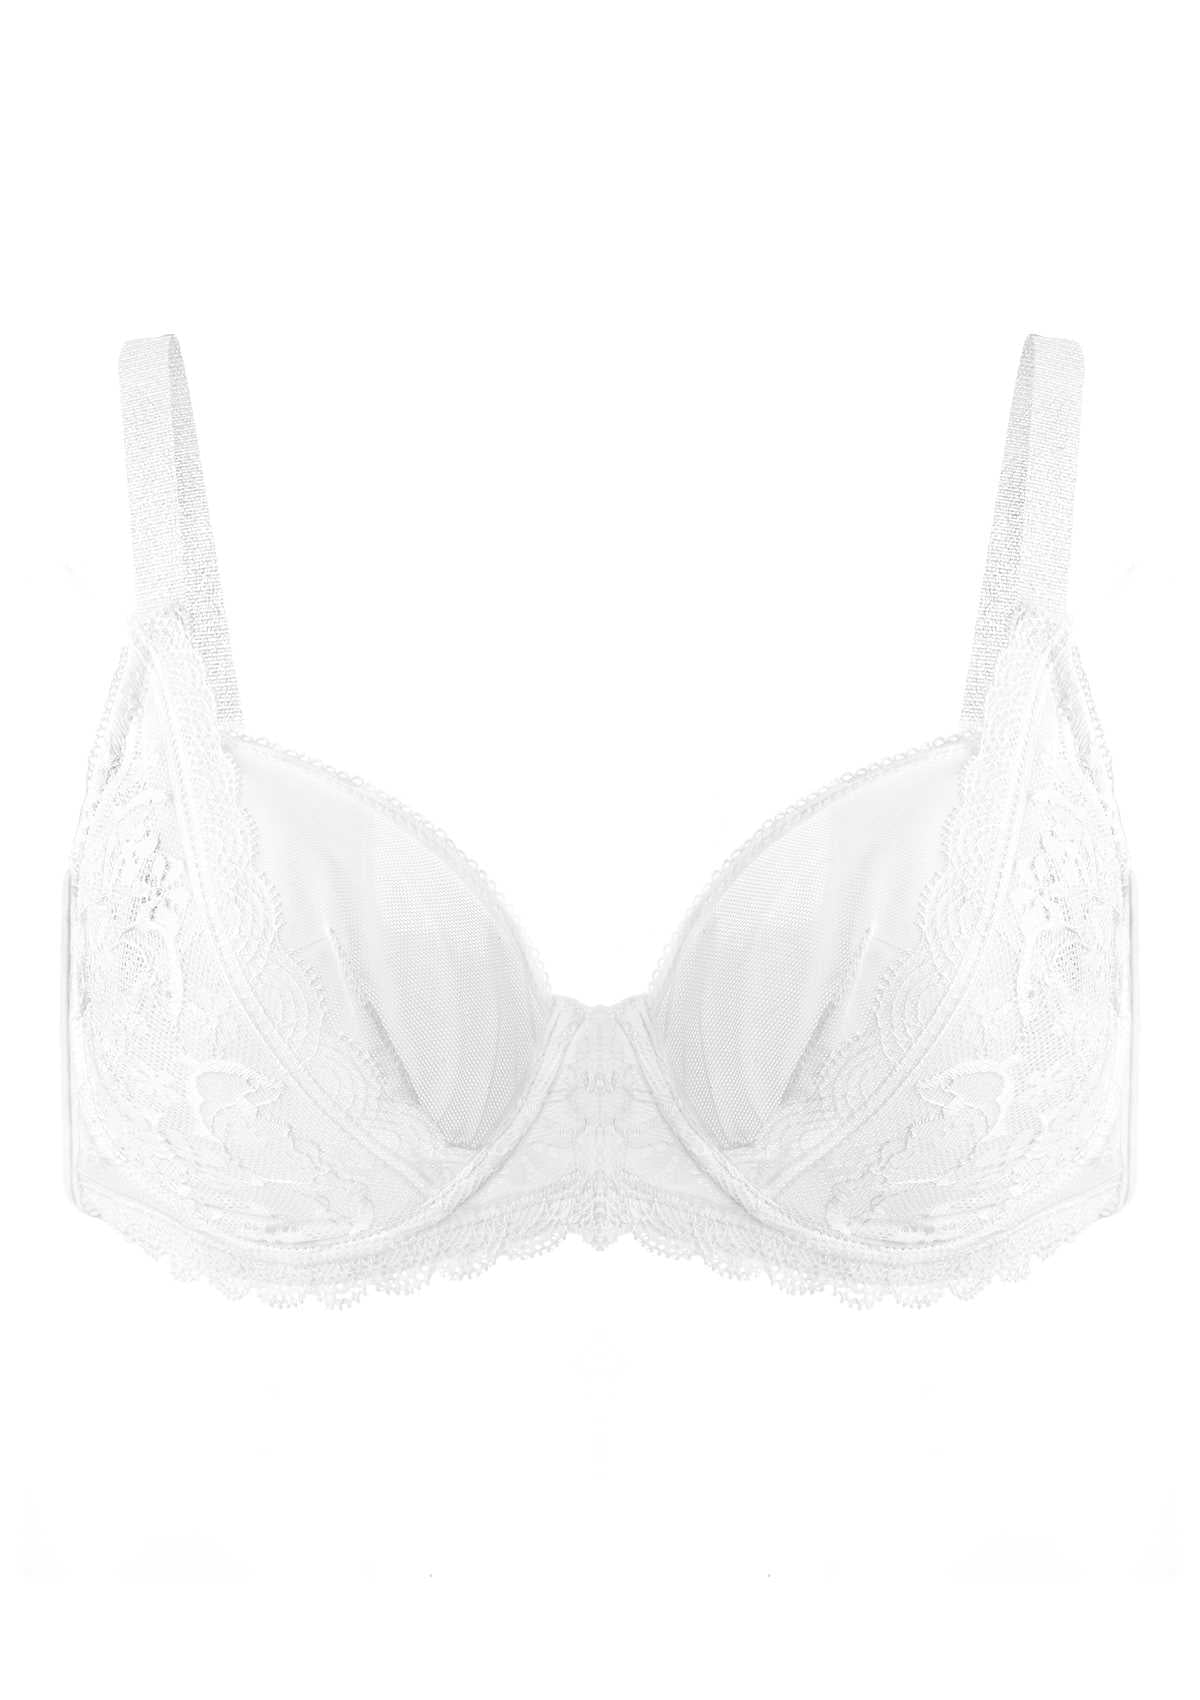 HSIA Anemone Big Bra: Best Bra For Lift And Support, Floral Bra - Light Blue / 36 / DD/E